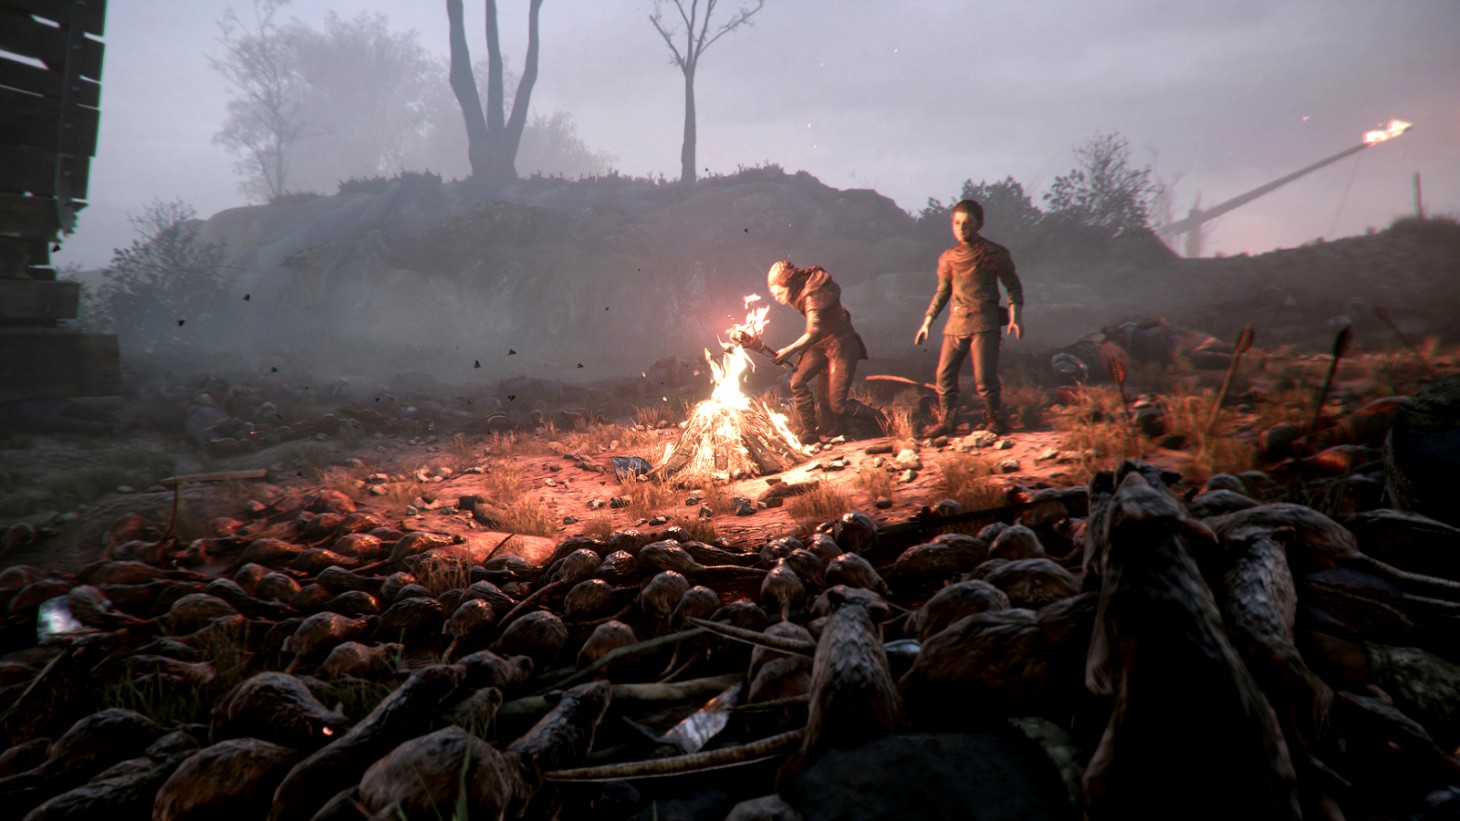 A Plague Tale: Requiem - Story, release date, collector's edition, and more